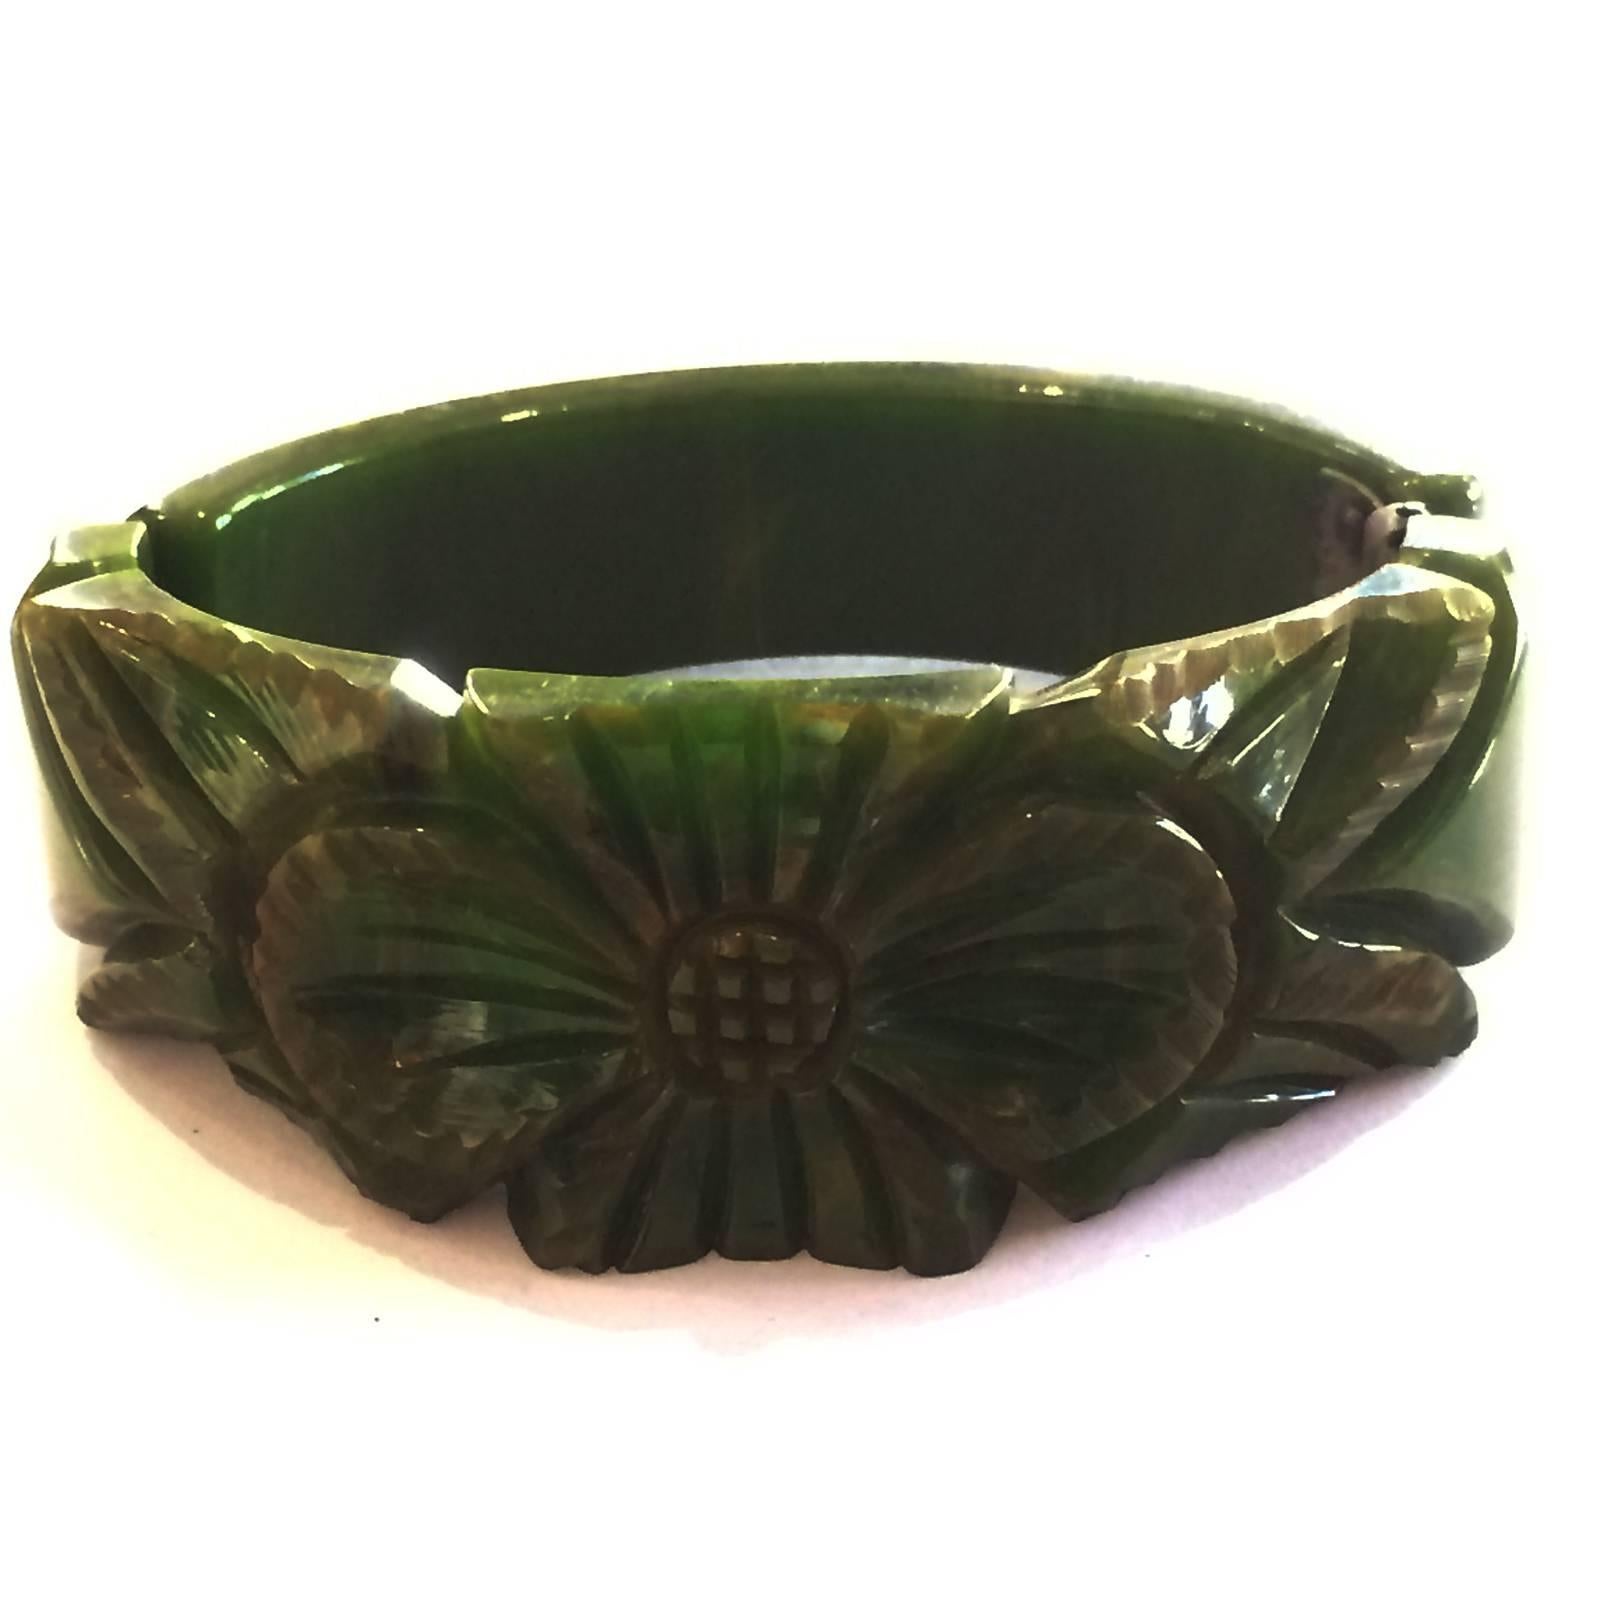 Art Deco Clamper Bangle heavily carved, green with fine yellow vein Bakelite in a central Flower and leaf pattern. Original nickel plate spring hinge in perfect working condition, with no damage or repairs at all to the bangle. One of the best you